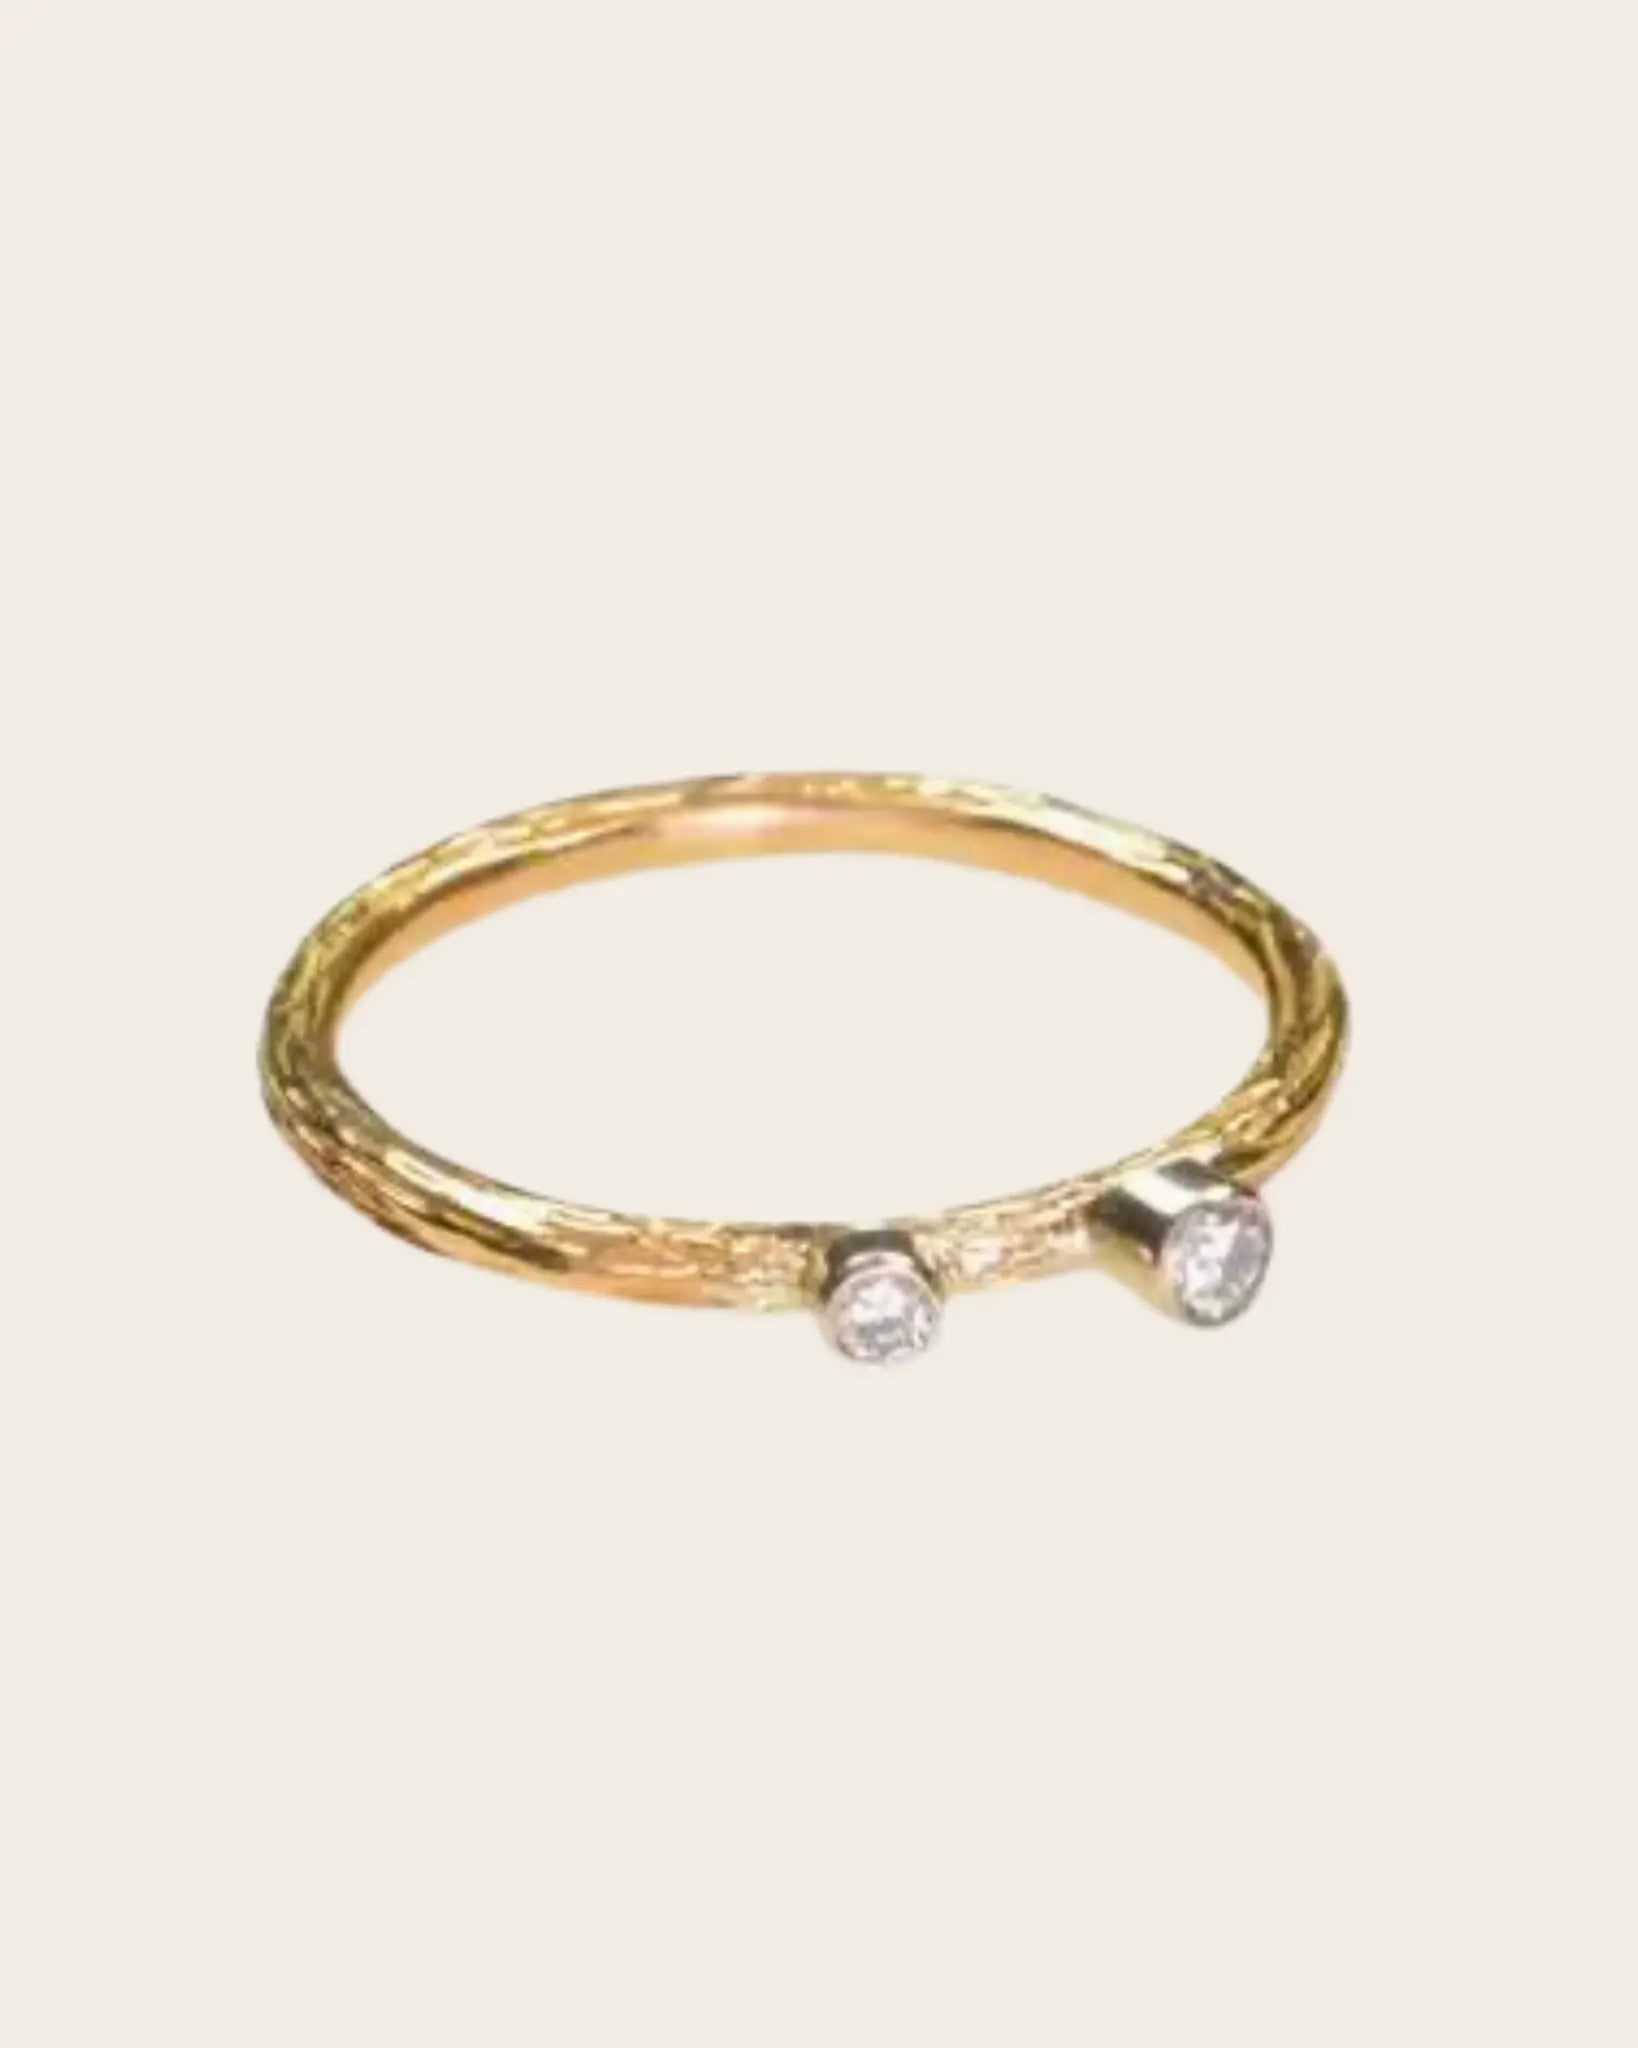 Gold And Diamond Pebble Ring Gold And Diamond Pebble Ring Sarah Graham Sarah Graham  Squash Blossom Vail